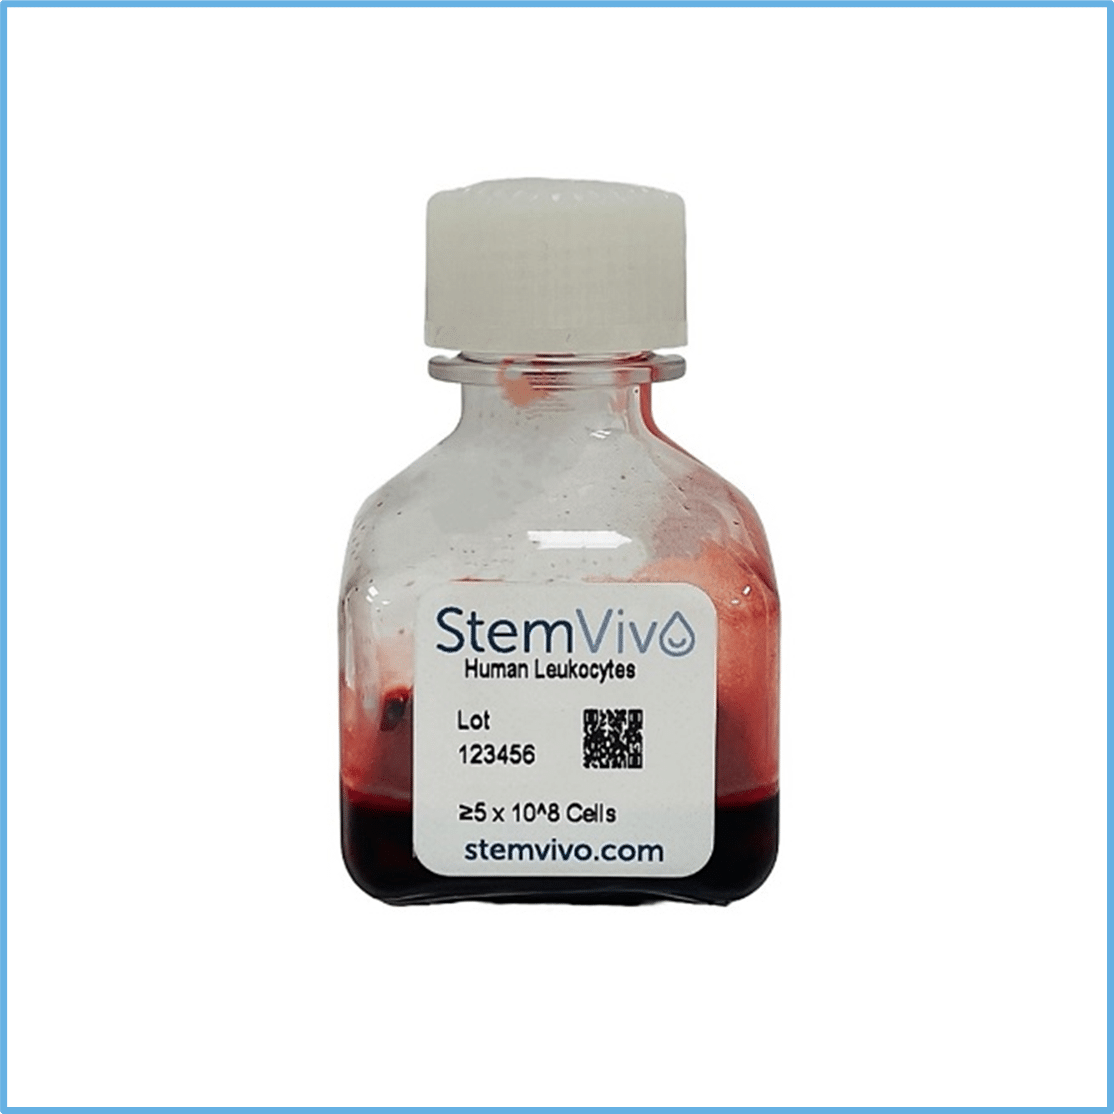 Small bottle with blood product and StemVivo label